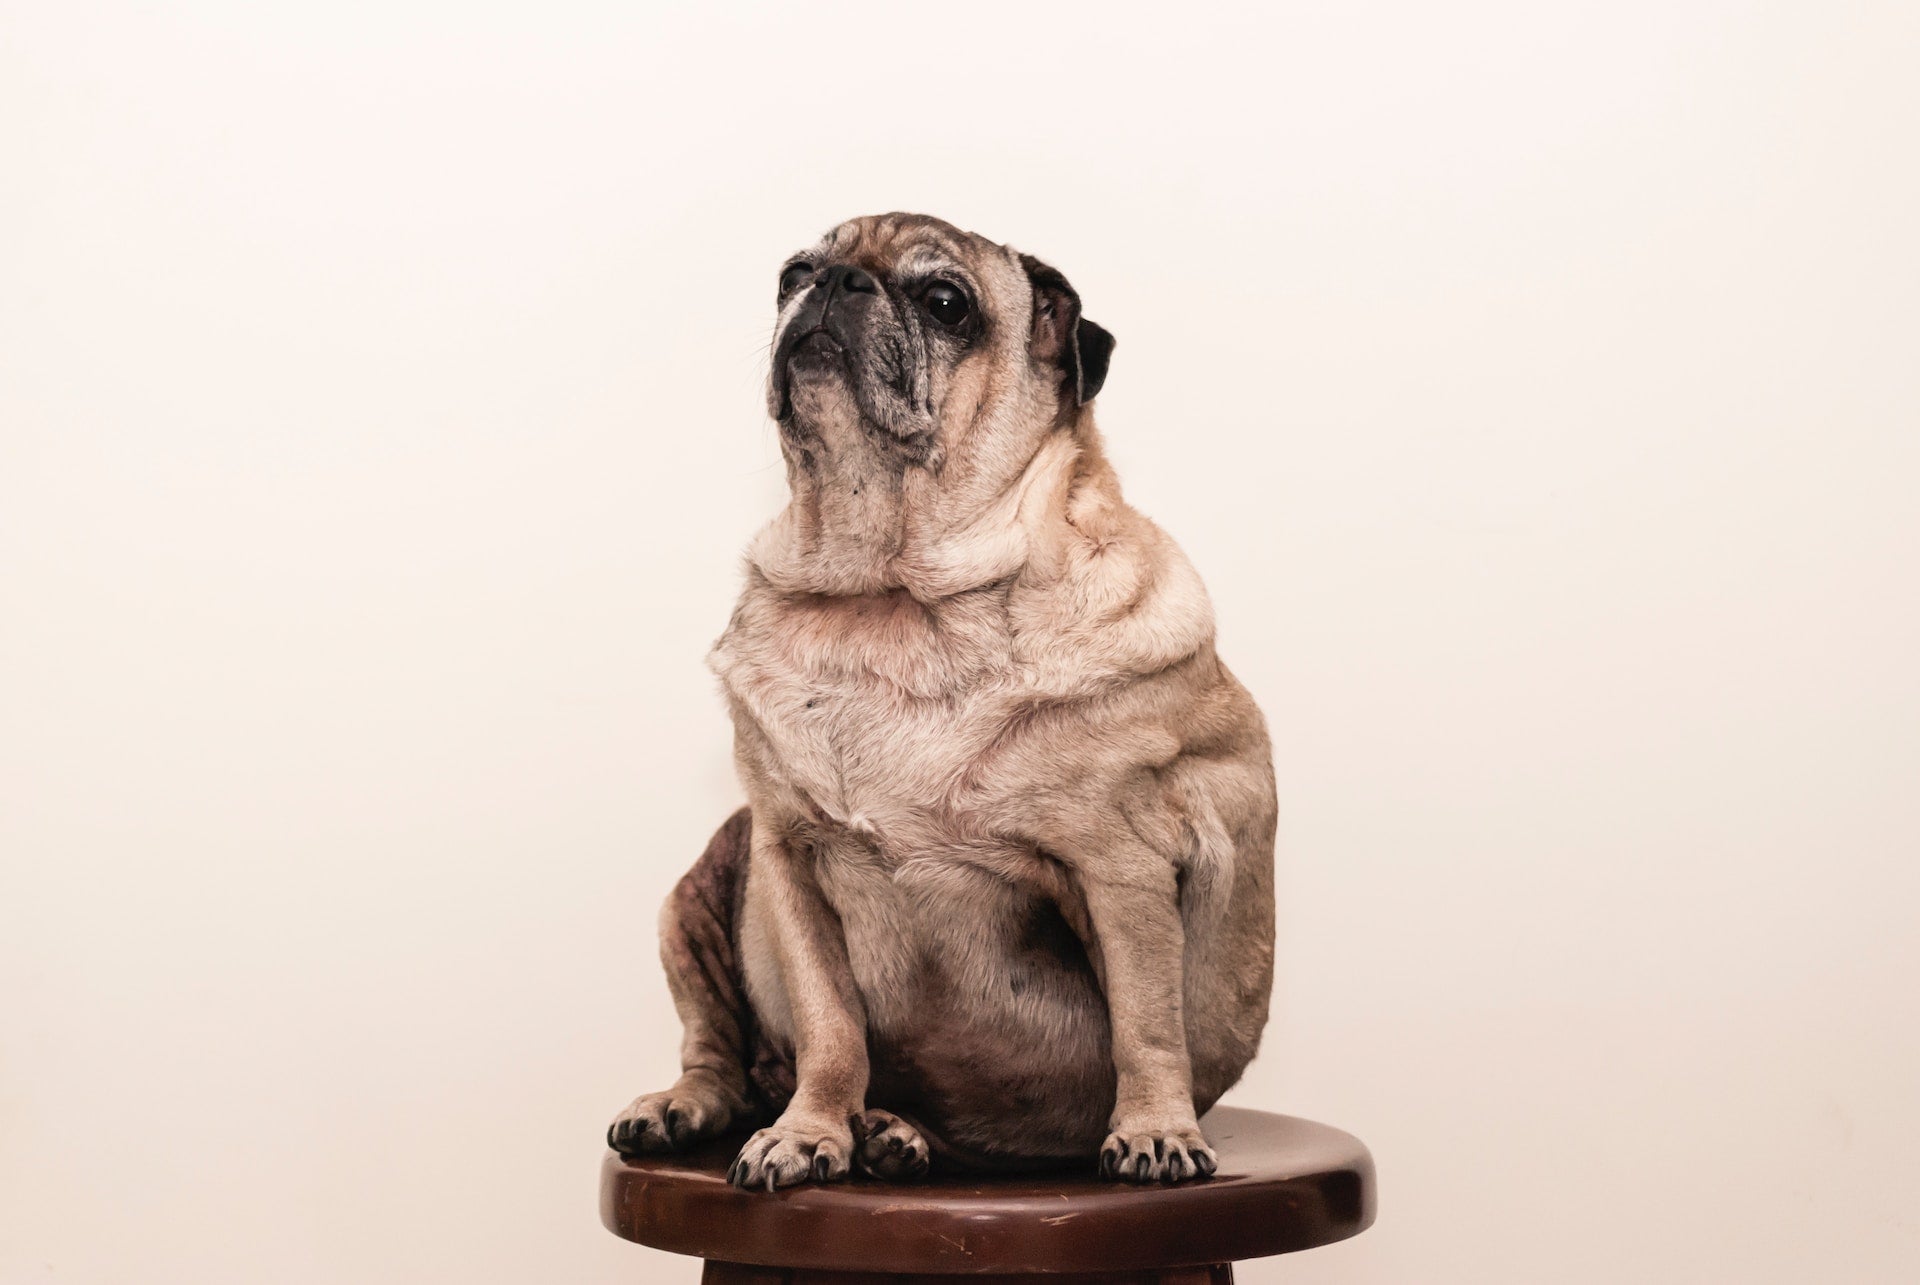 Weight loss for dogs – How to tip the scales in your favour